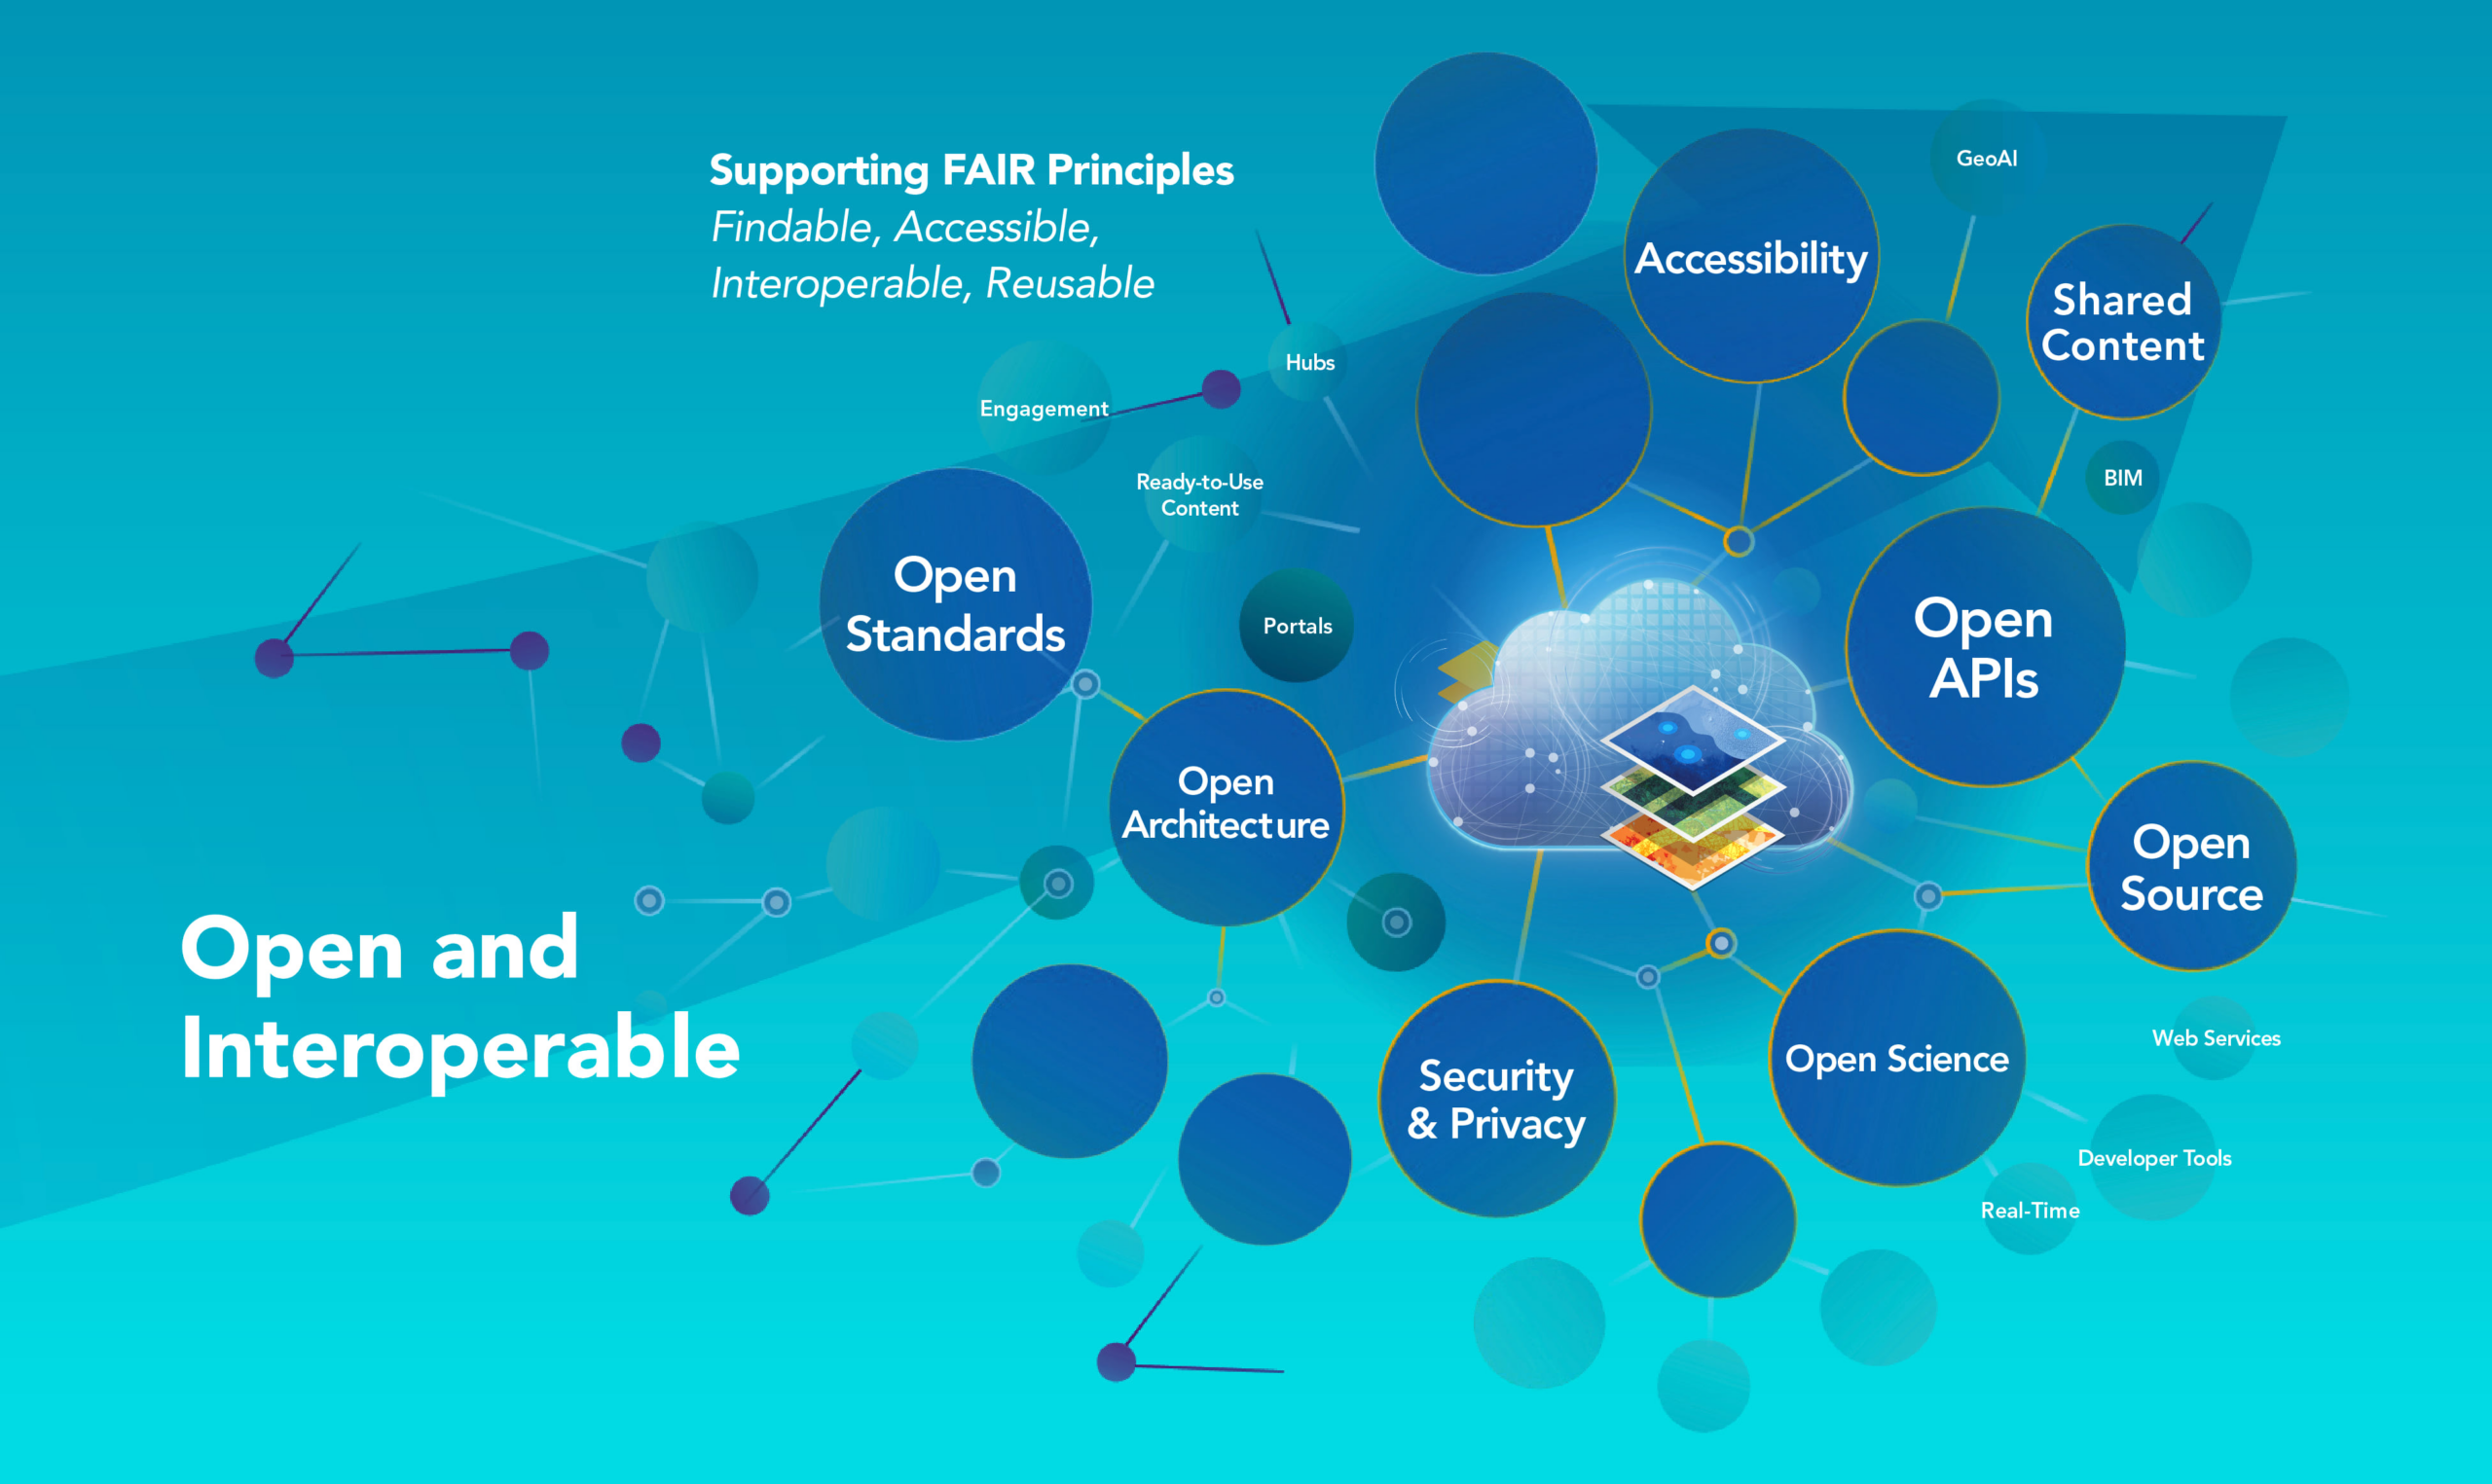 Diagram depicting the ArcGIS open platform including open standards, open architecture, open data, open source, open APIs, open science, security and privacy,